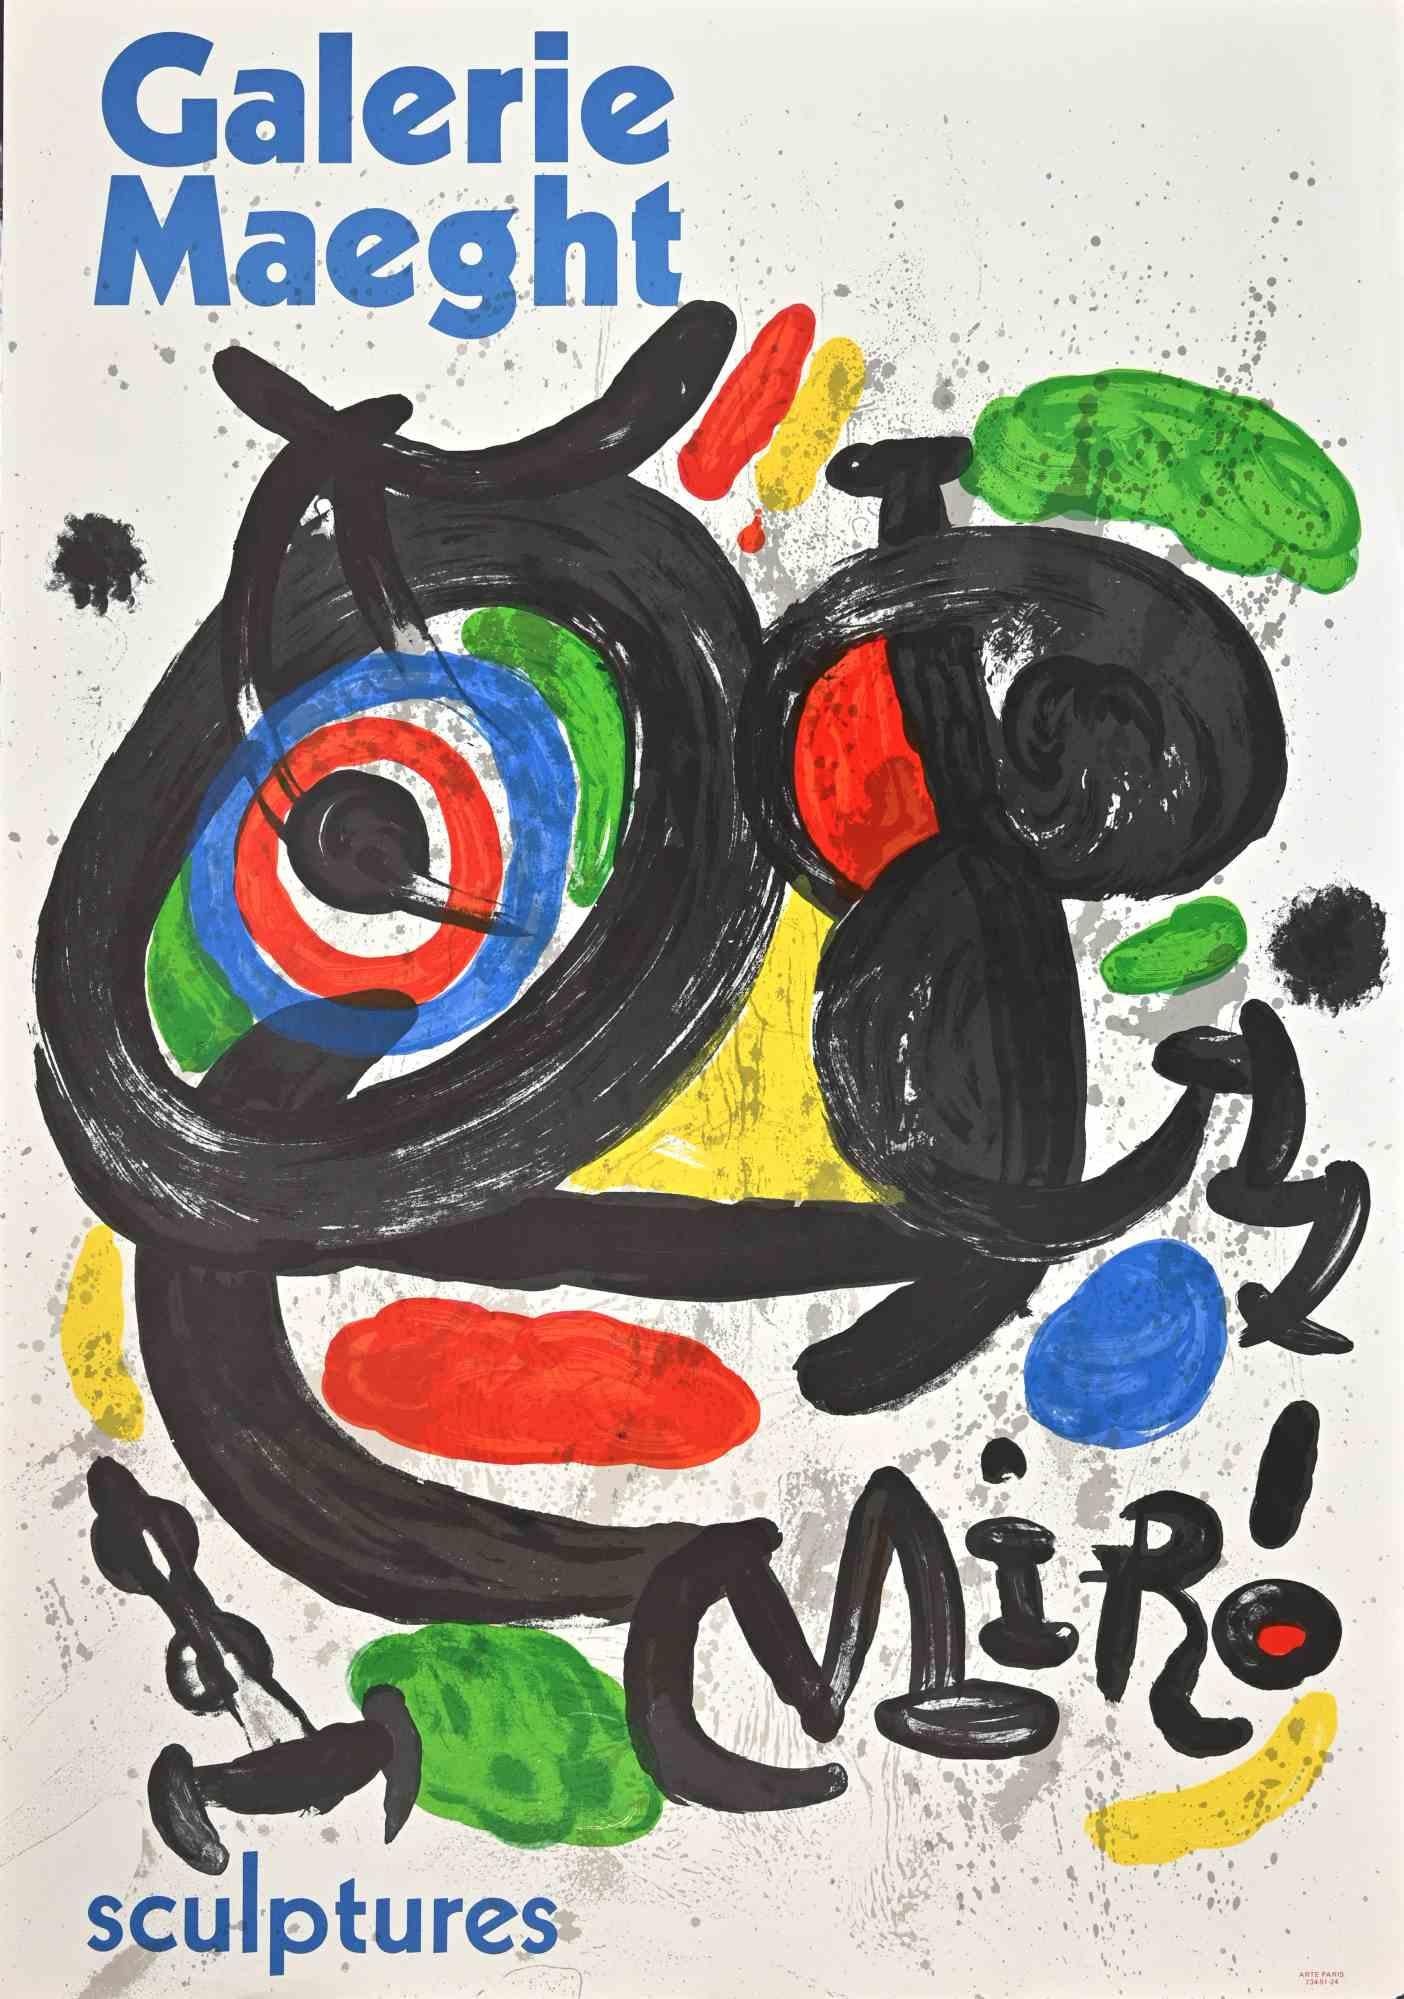 (after) Joan Miró Abstract Print - Vintage Poster Exhibition Galerie Maeght-Lithograph/Offset after J. Mirò-1978